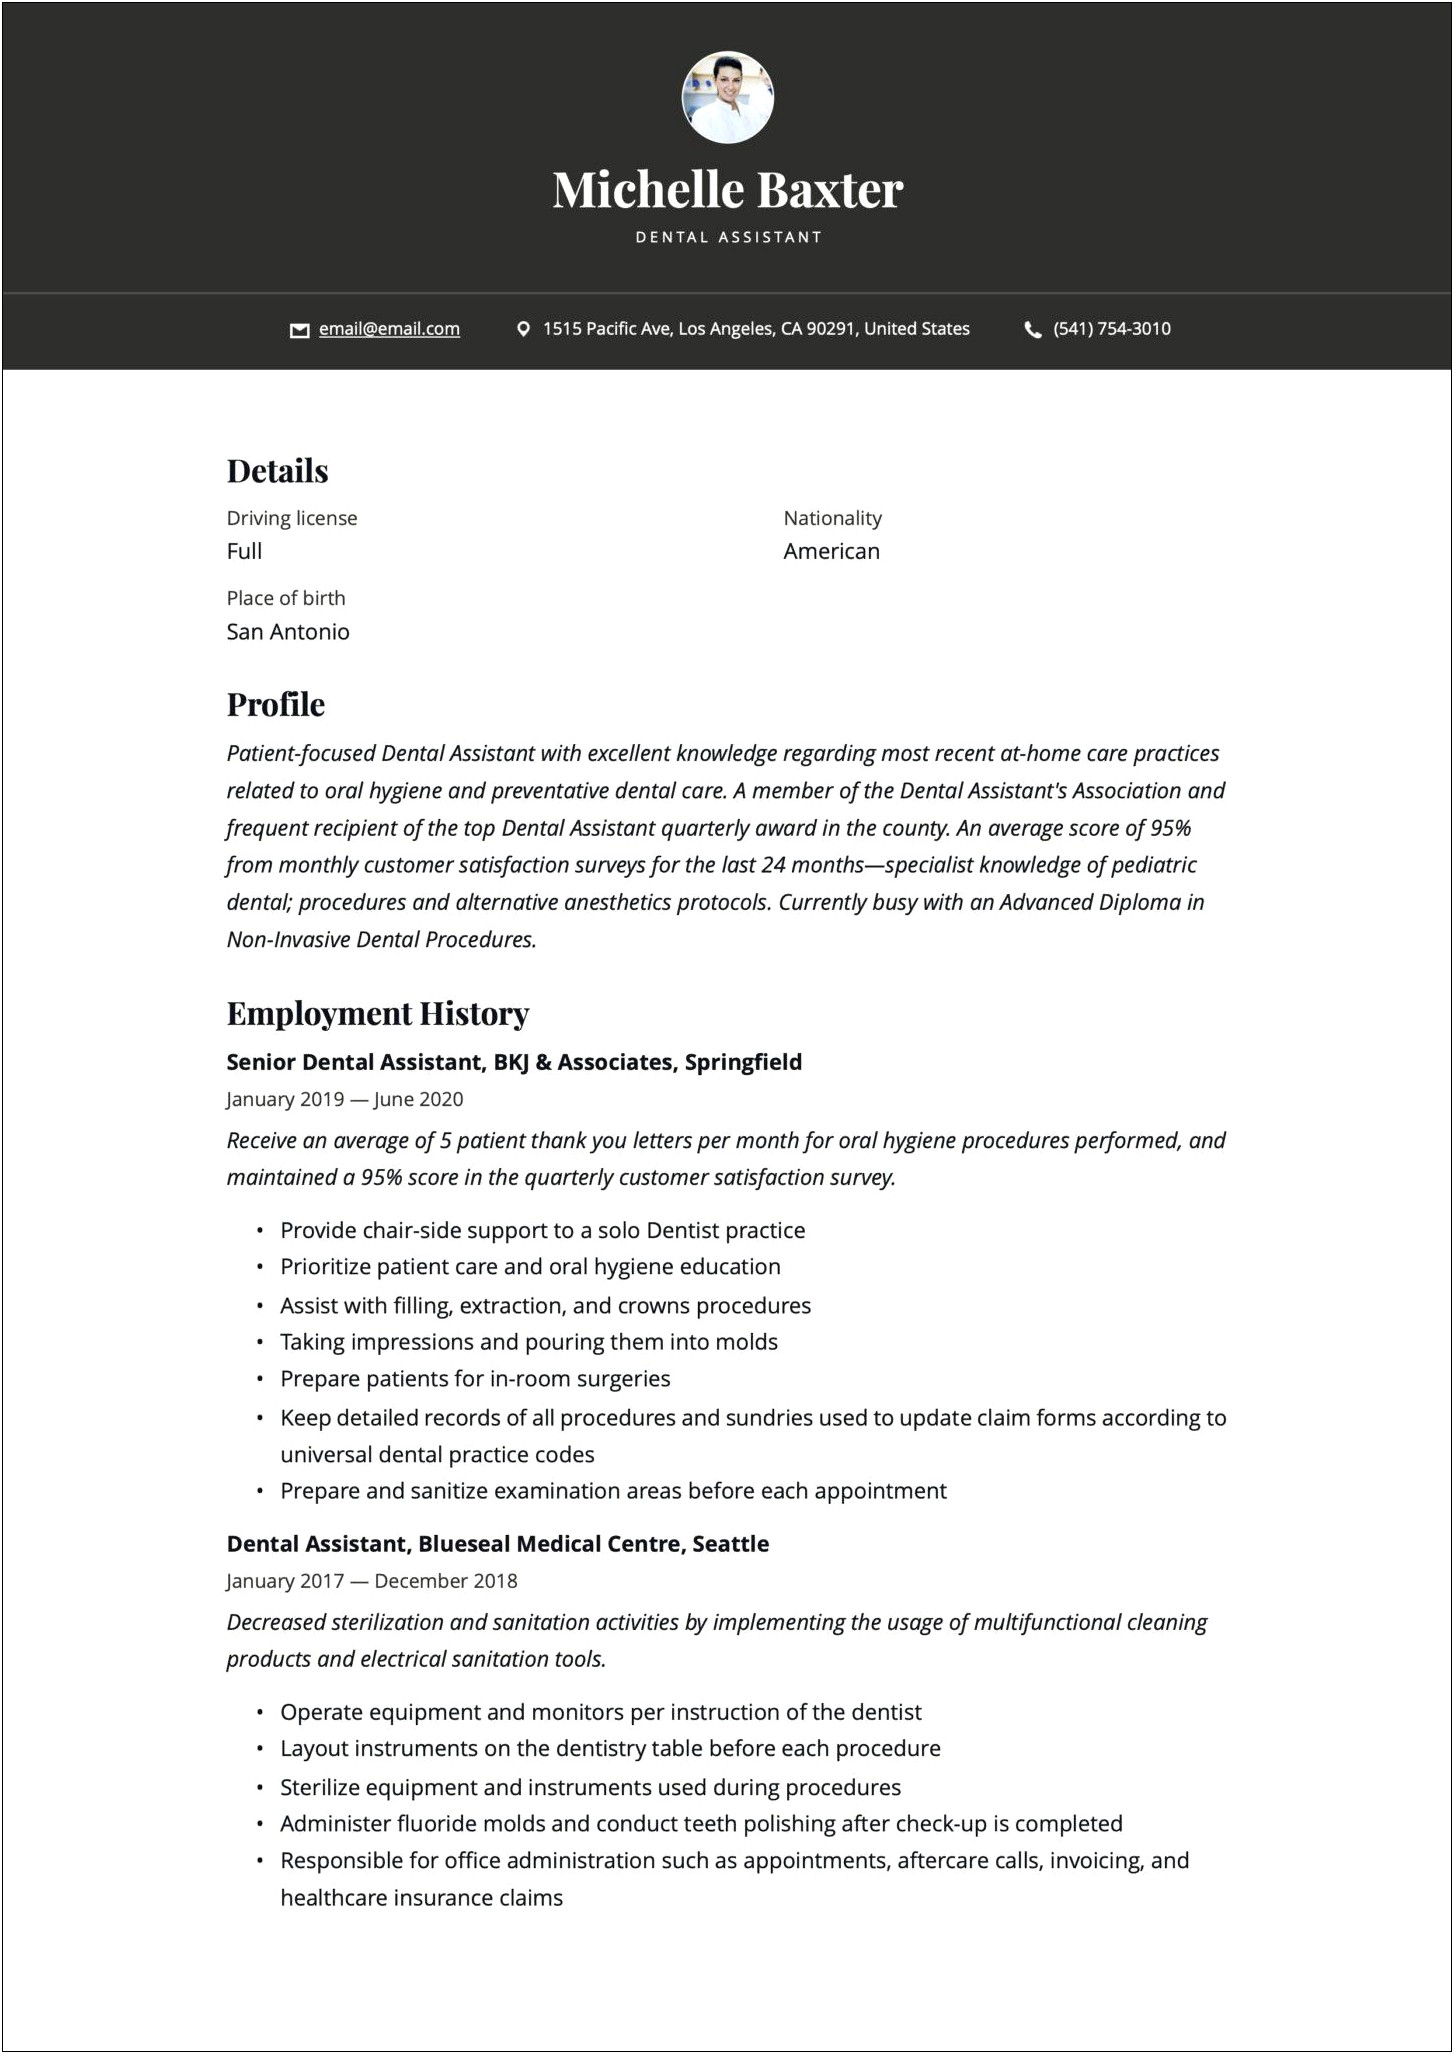 Professional Dental Assistant Resume Example